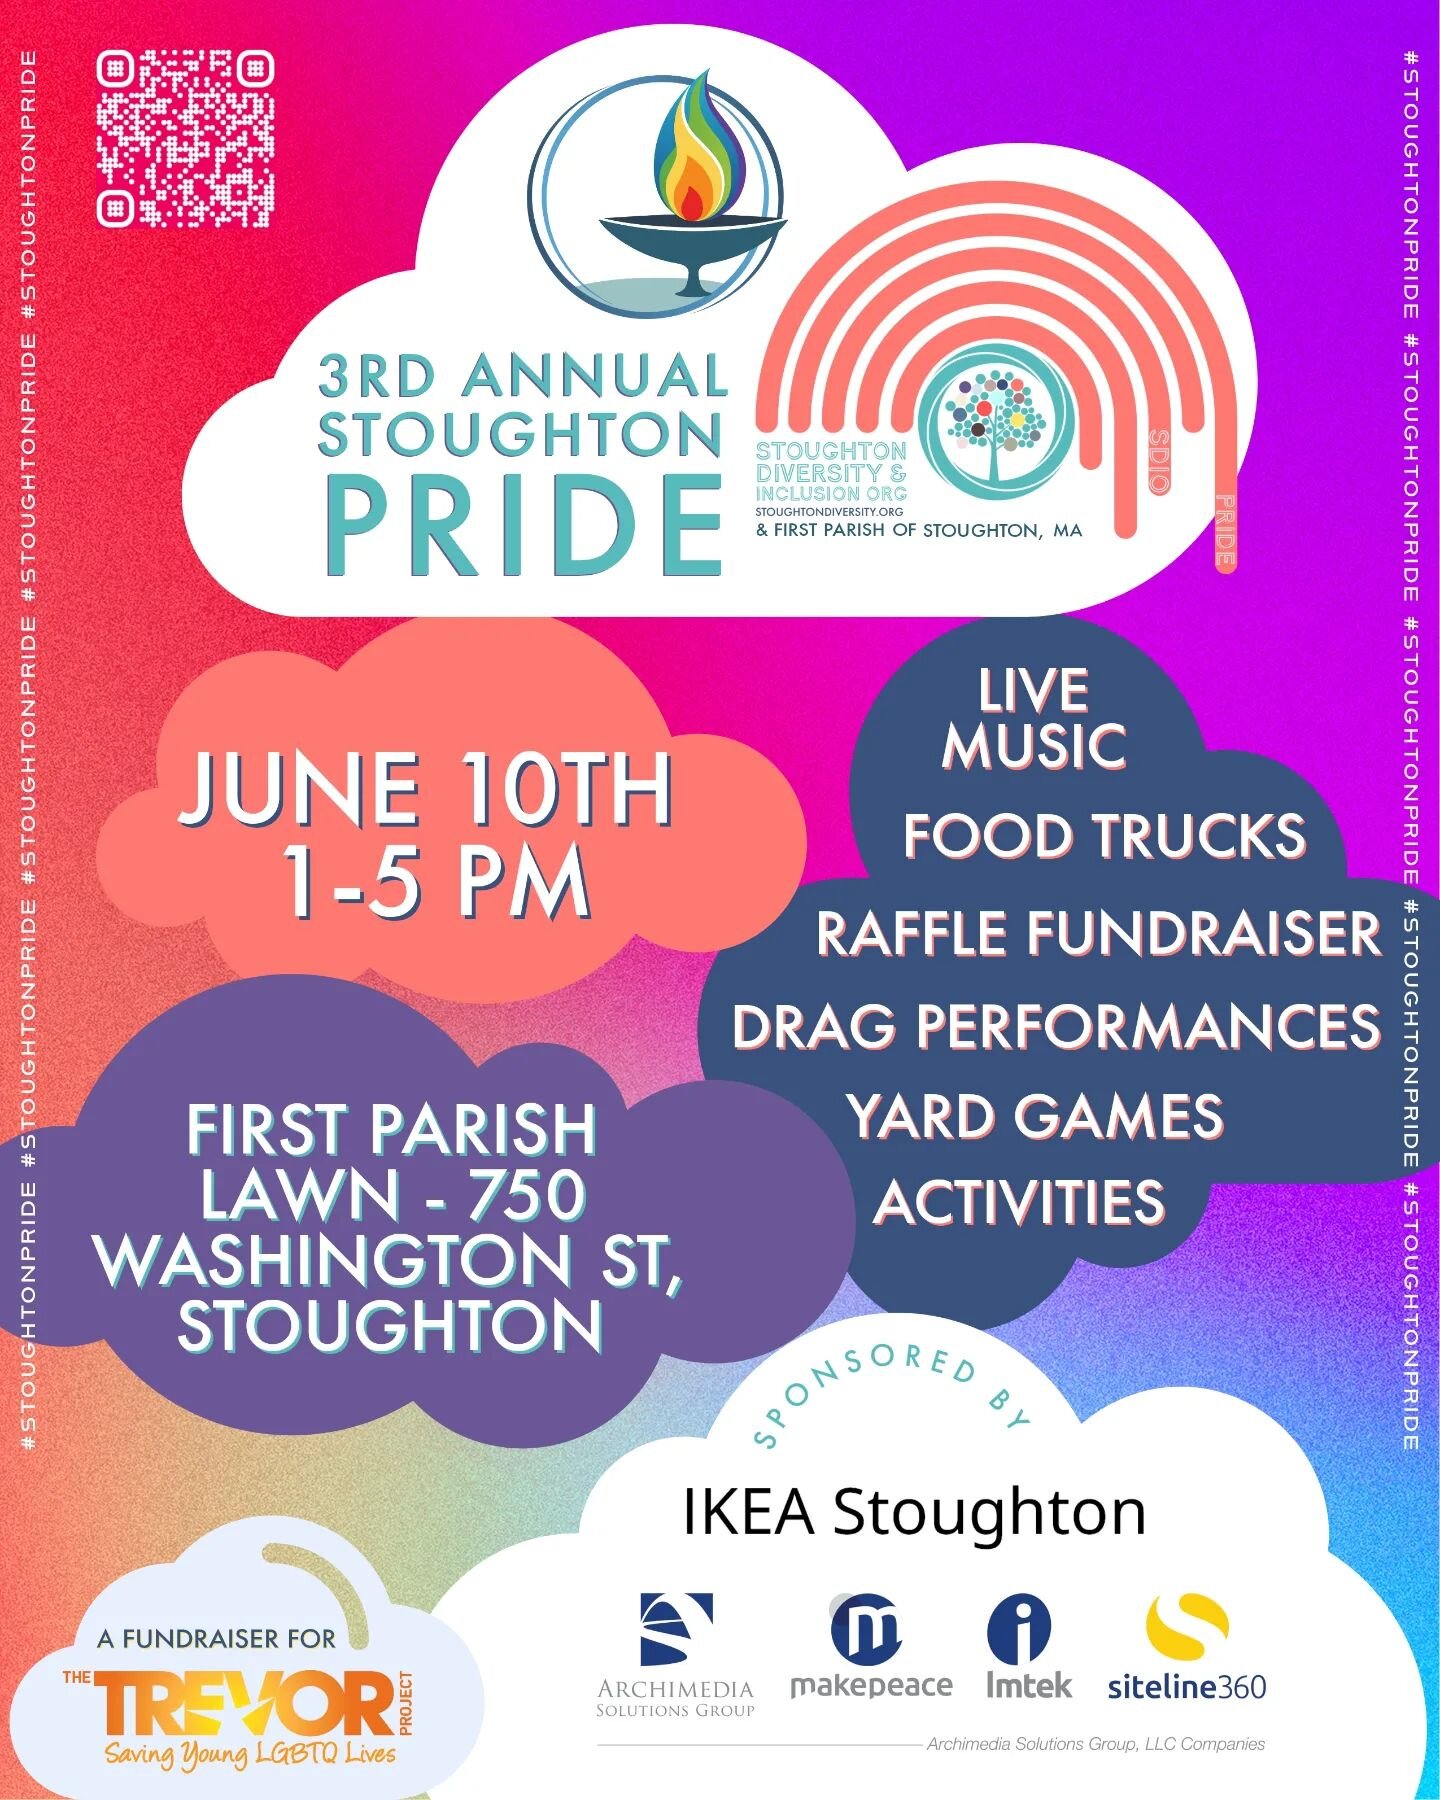 STOUGHTON PRIDE!!! 🏳️&zwj;🌈🏳️&zwj;⚧️🌈🎉❤️🧡💛💚💙💜🖤🤎🎉

Join us for the Third Annual Stoughton Pride on June 10th from 1-5pm on the First Parish of Stoughton lawn at 750 Washington St, Stoughton!

We will have live music, multiple food trucks,